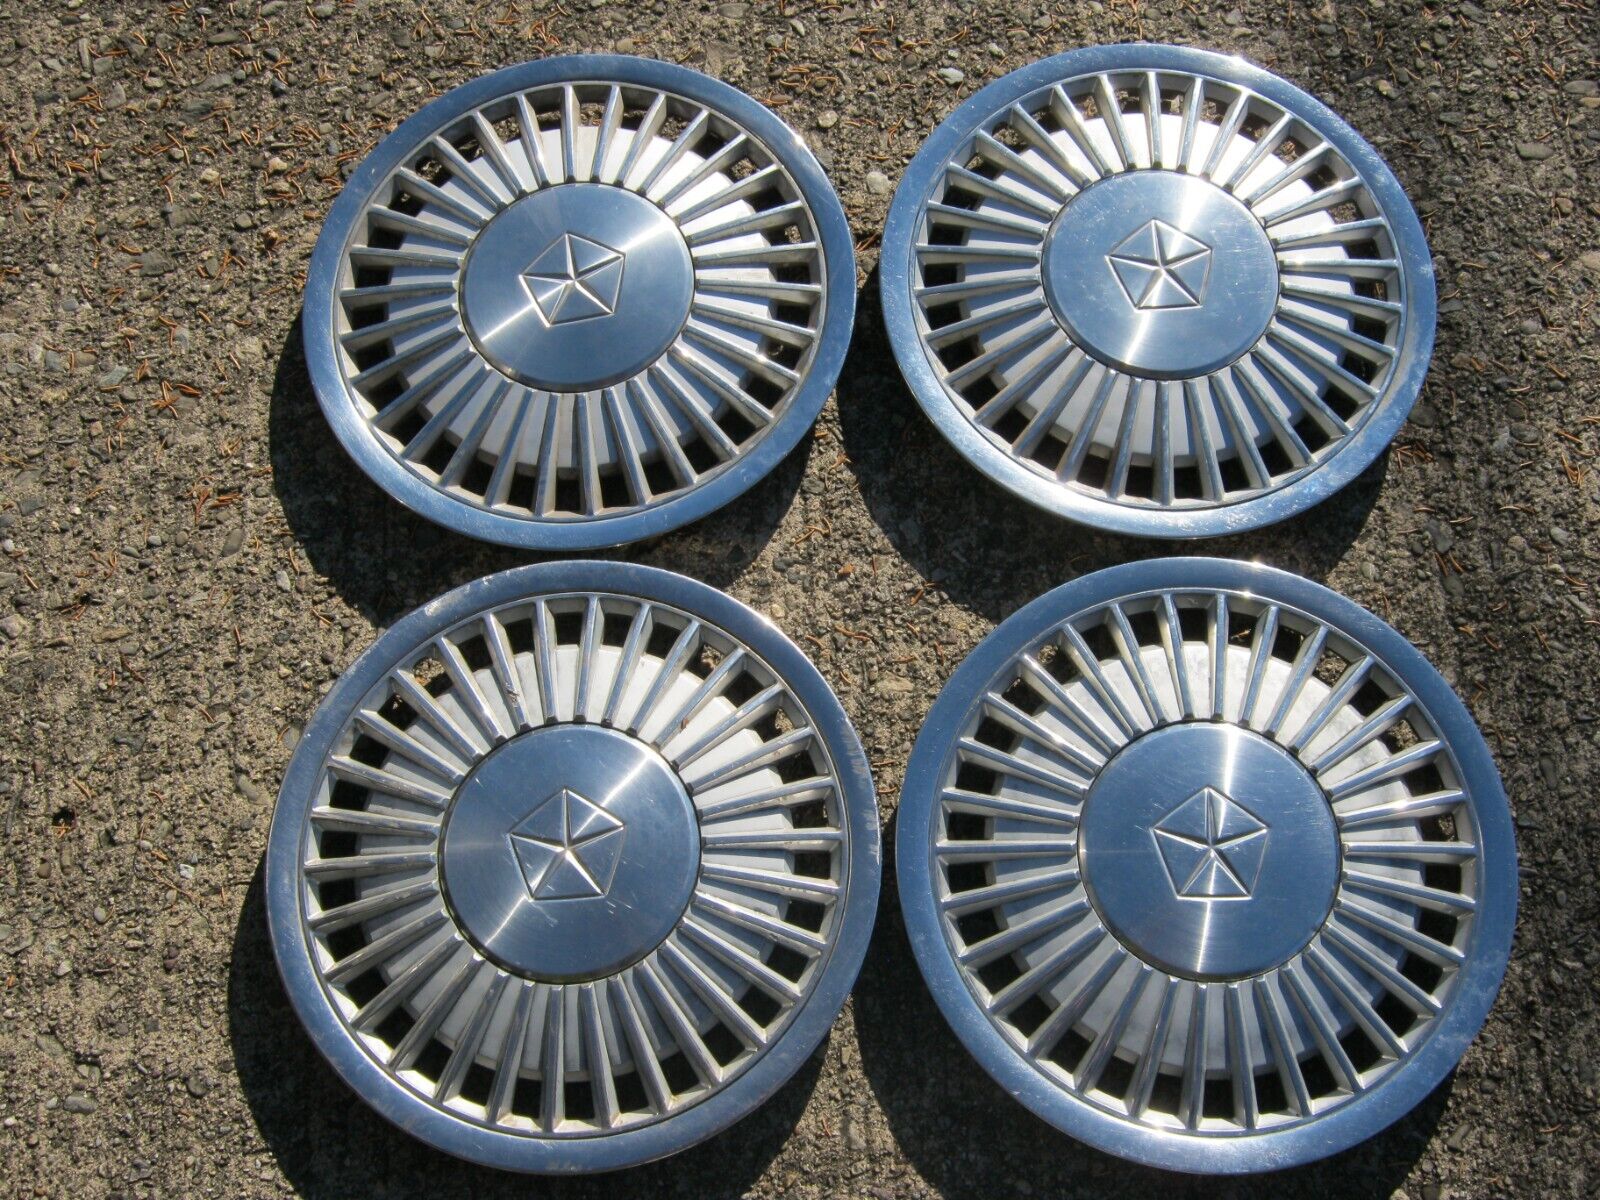 Genuine 1984 to 1988 Plymouth Voyager Caravelle 14 inch hubcaps wheel covers